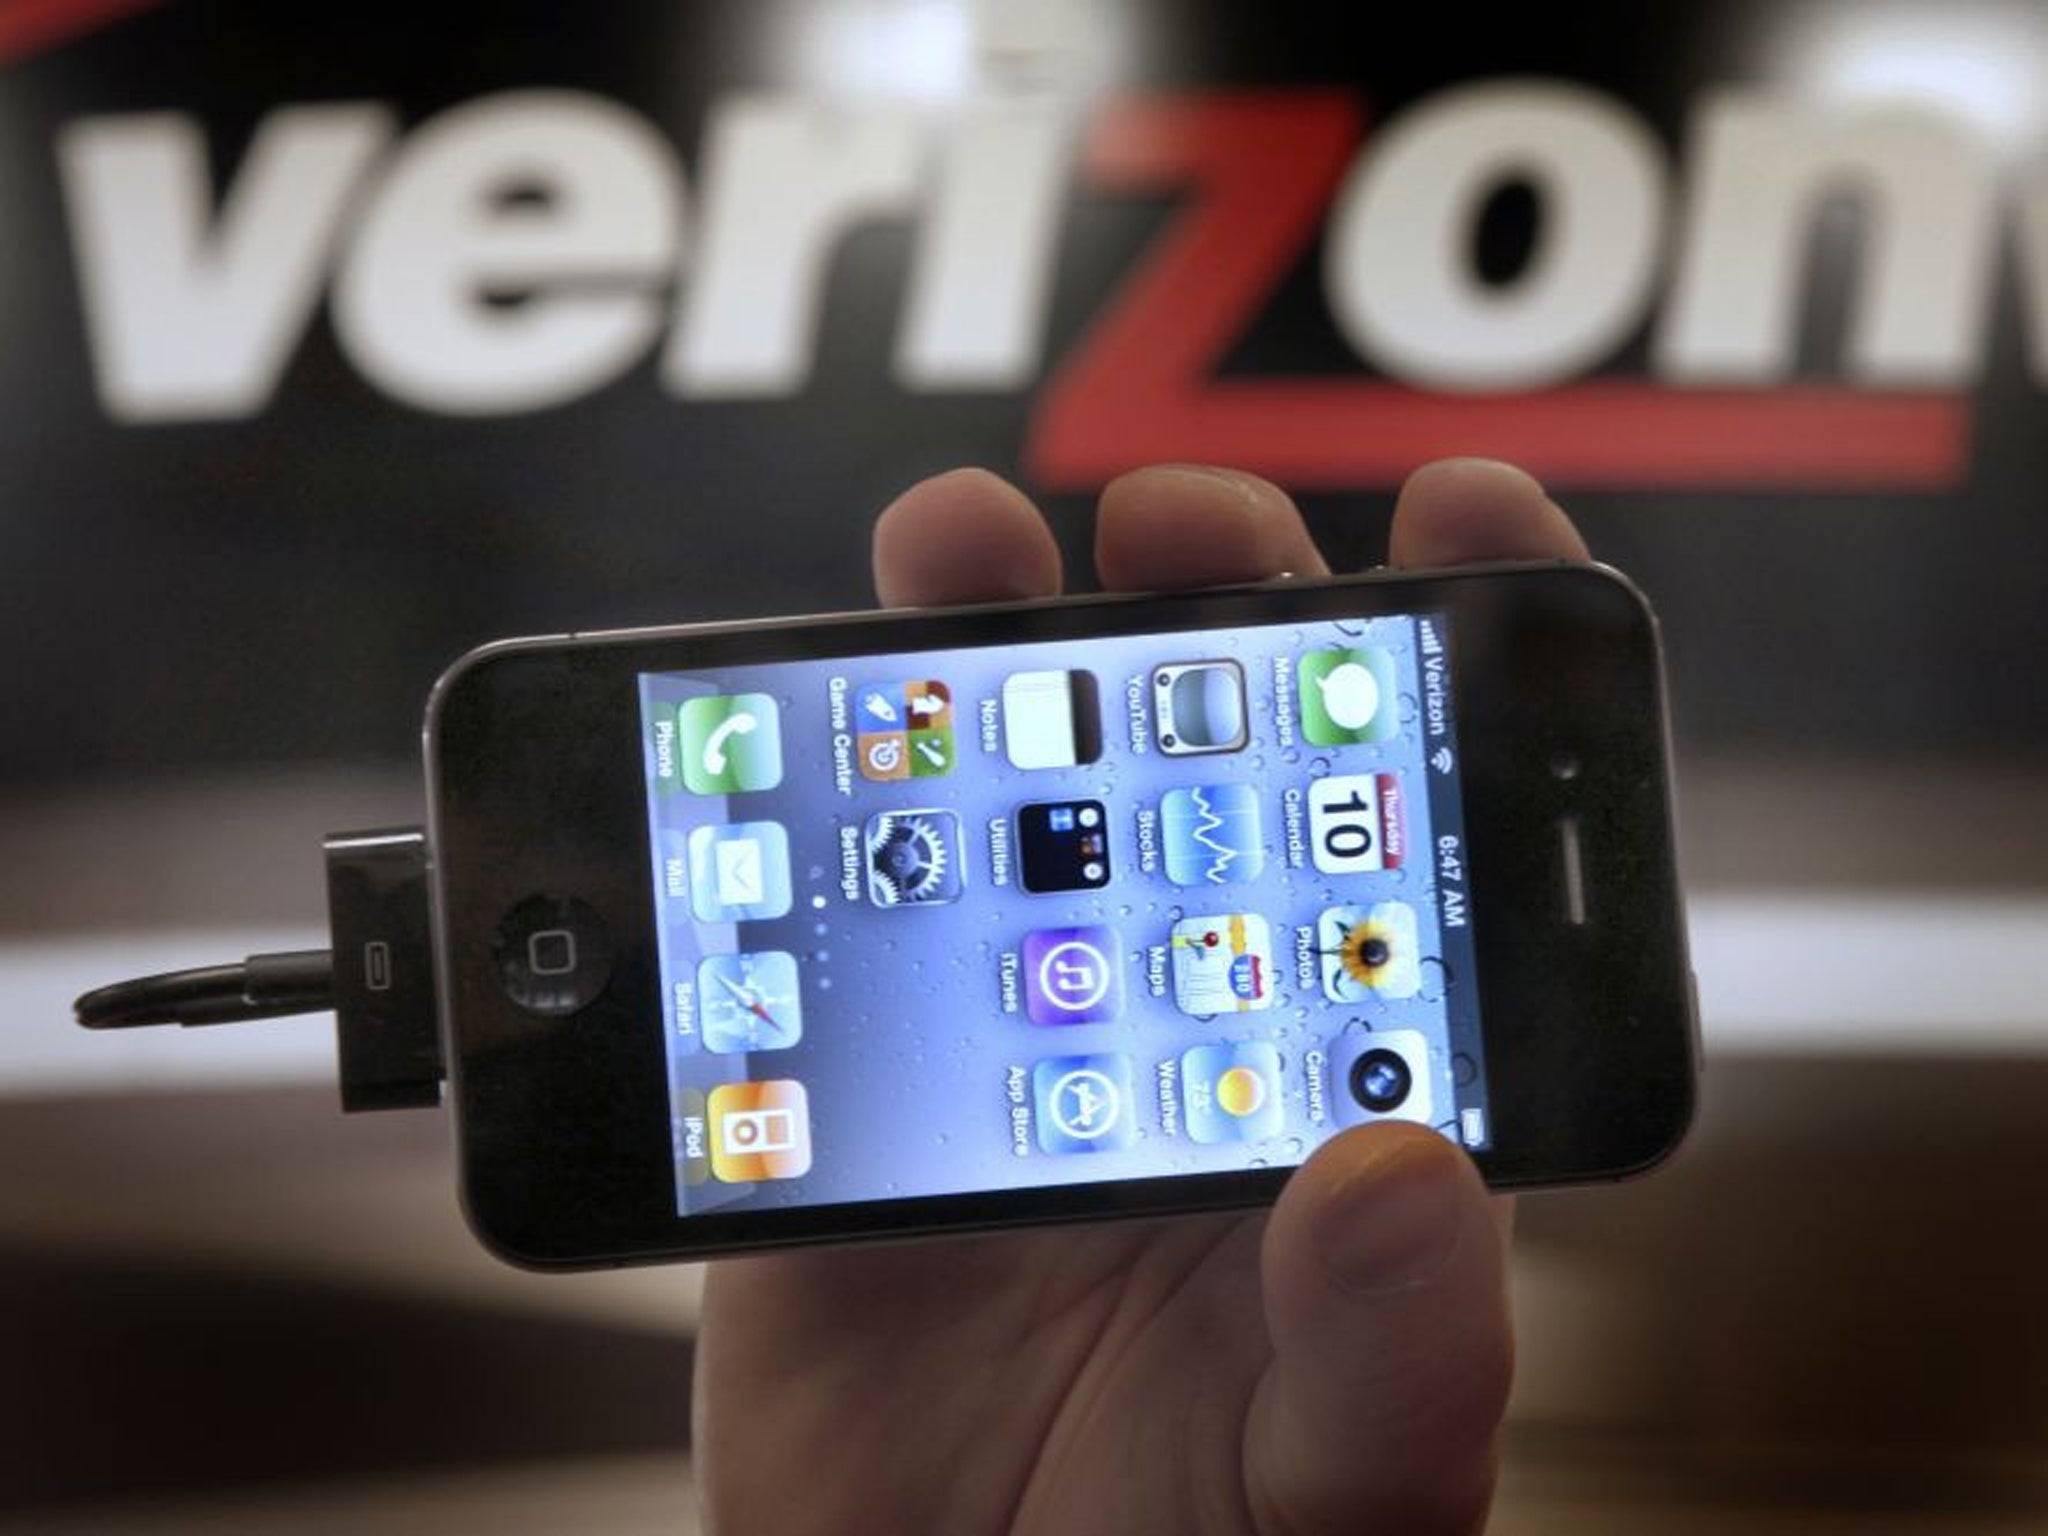 The order marked 'Top Secret' and issued by the US Foreign Intelligence Surveillance Court directs Verizon's Business Network Services Inc and Verizon Business Services units to hand over electronic data including all calling records on an 'ongoing, daily basis' until the order expires on 19 July, 2013